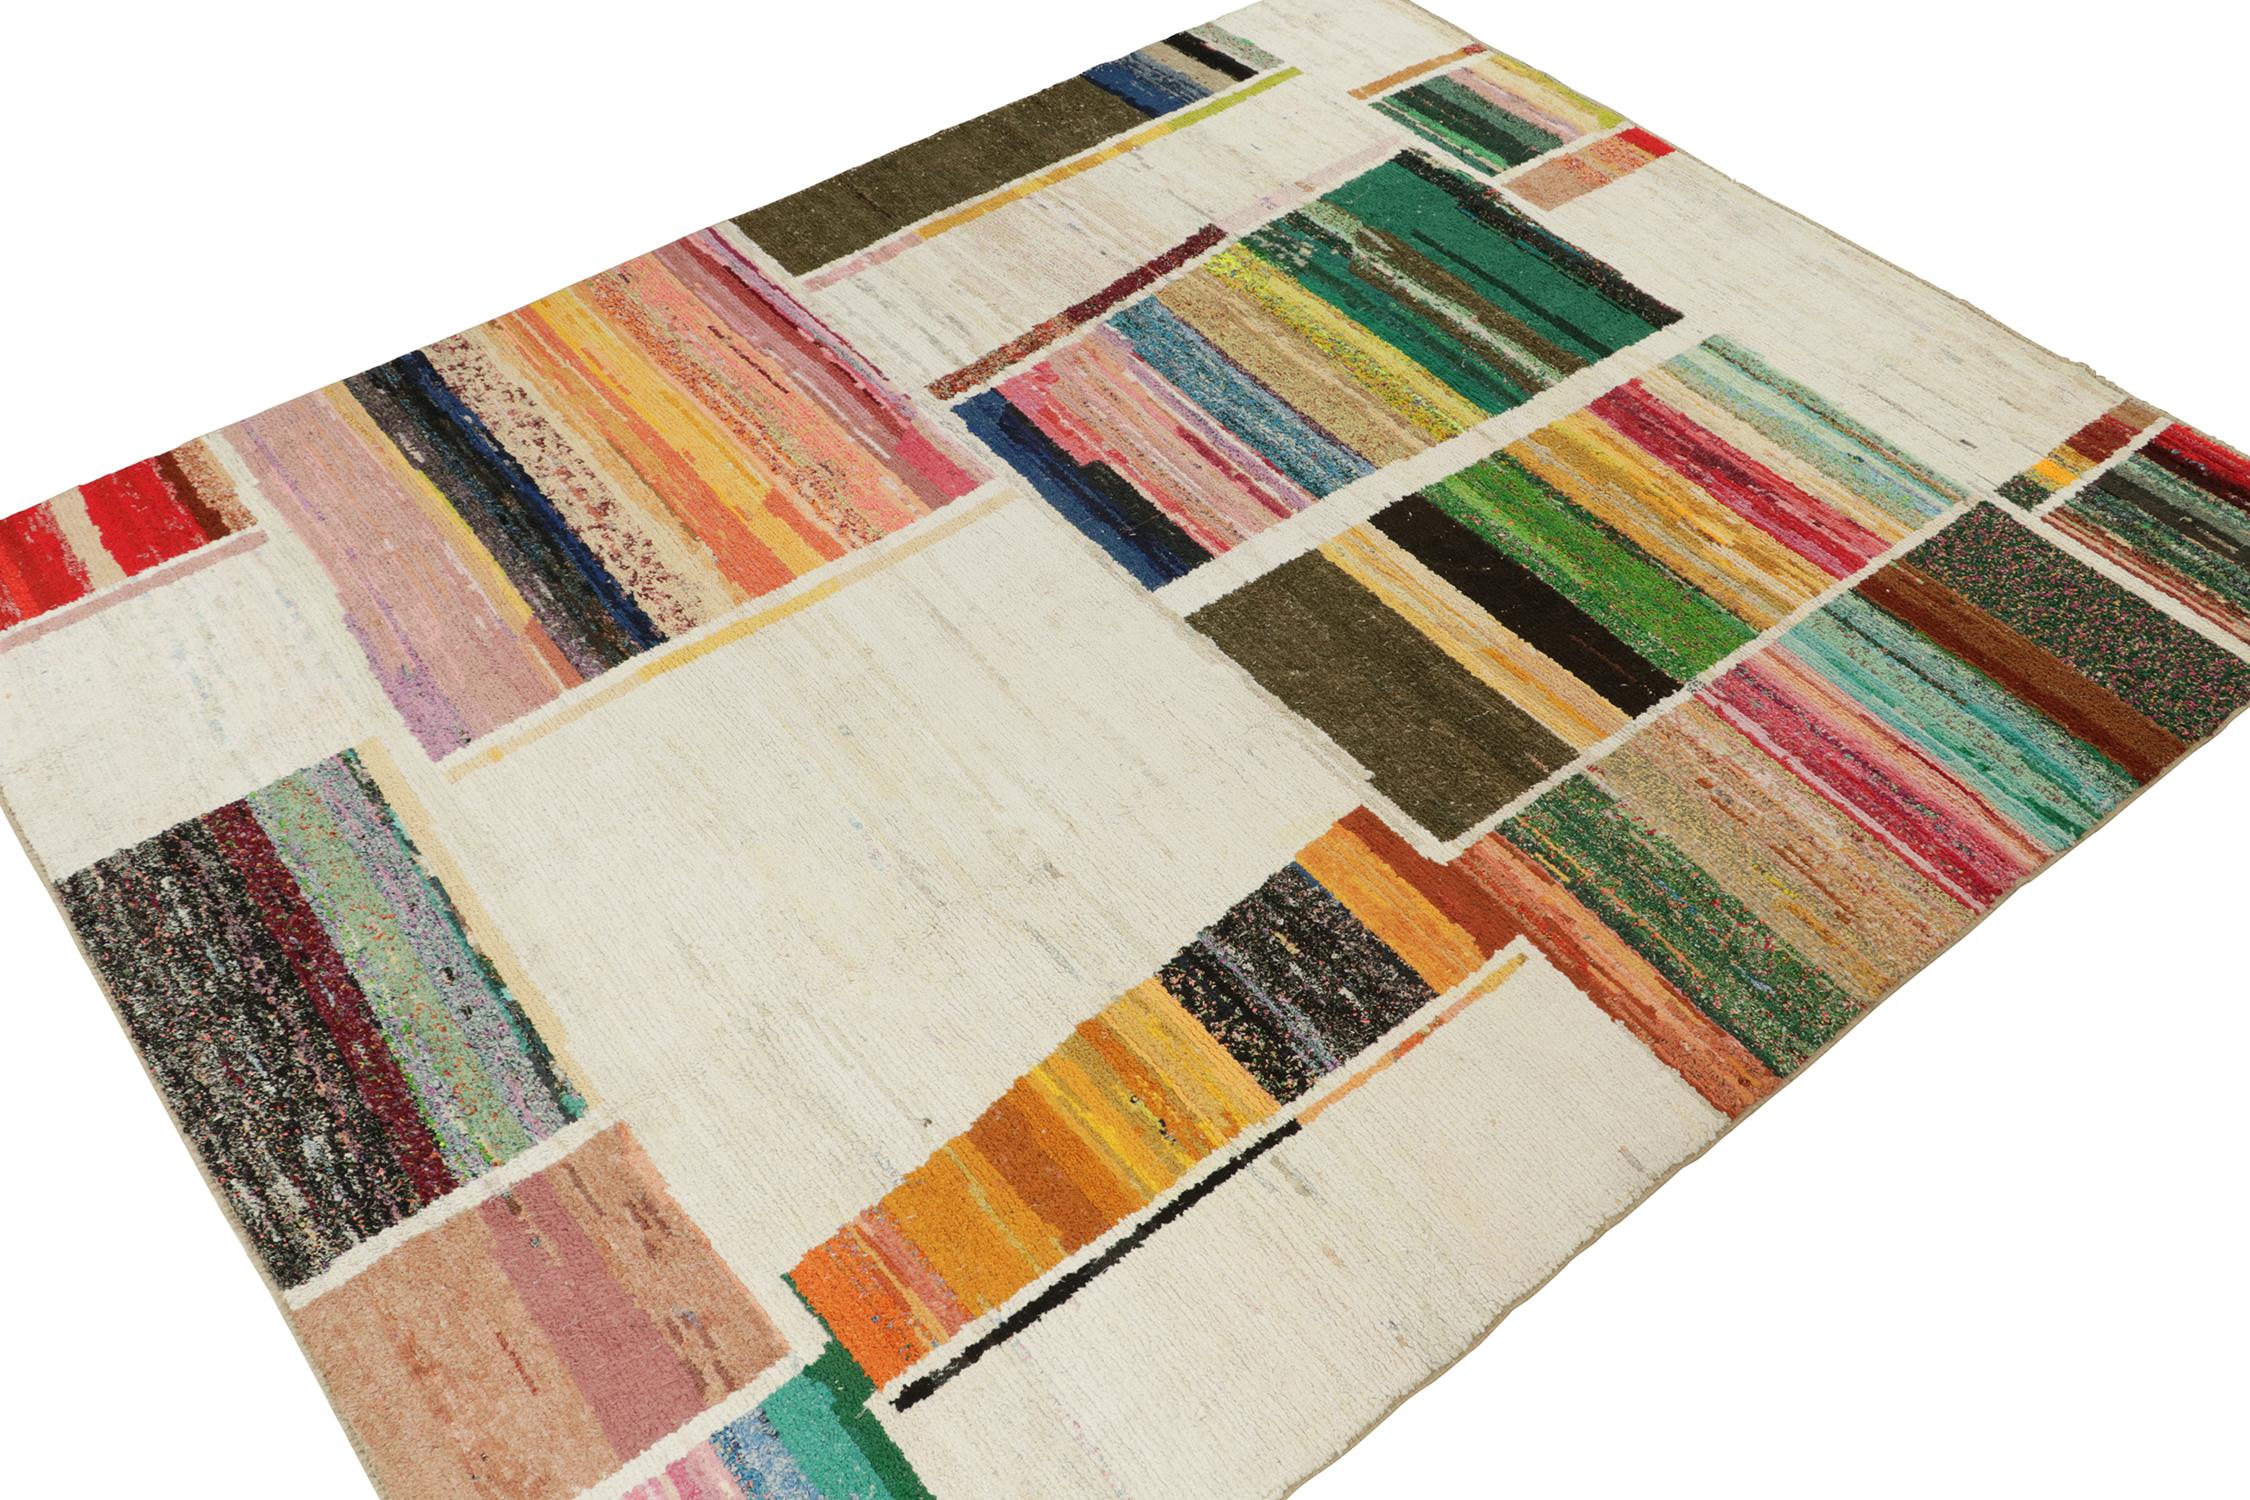 This 10x13 rug is a bold new addition to Rug & Kilim’s Moroccan rug collection. Hand-knotted in wool, it draws on Berber designs in the Boucherouite style with a vibrant polychromatic colorway.

Further On the Design:

This play of colorful